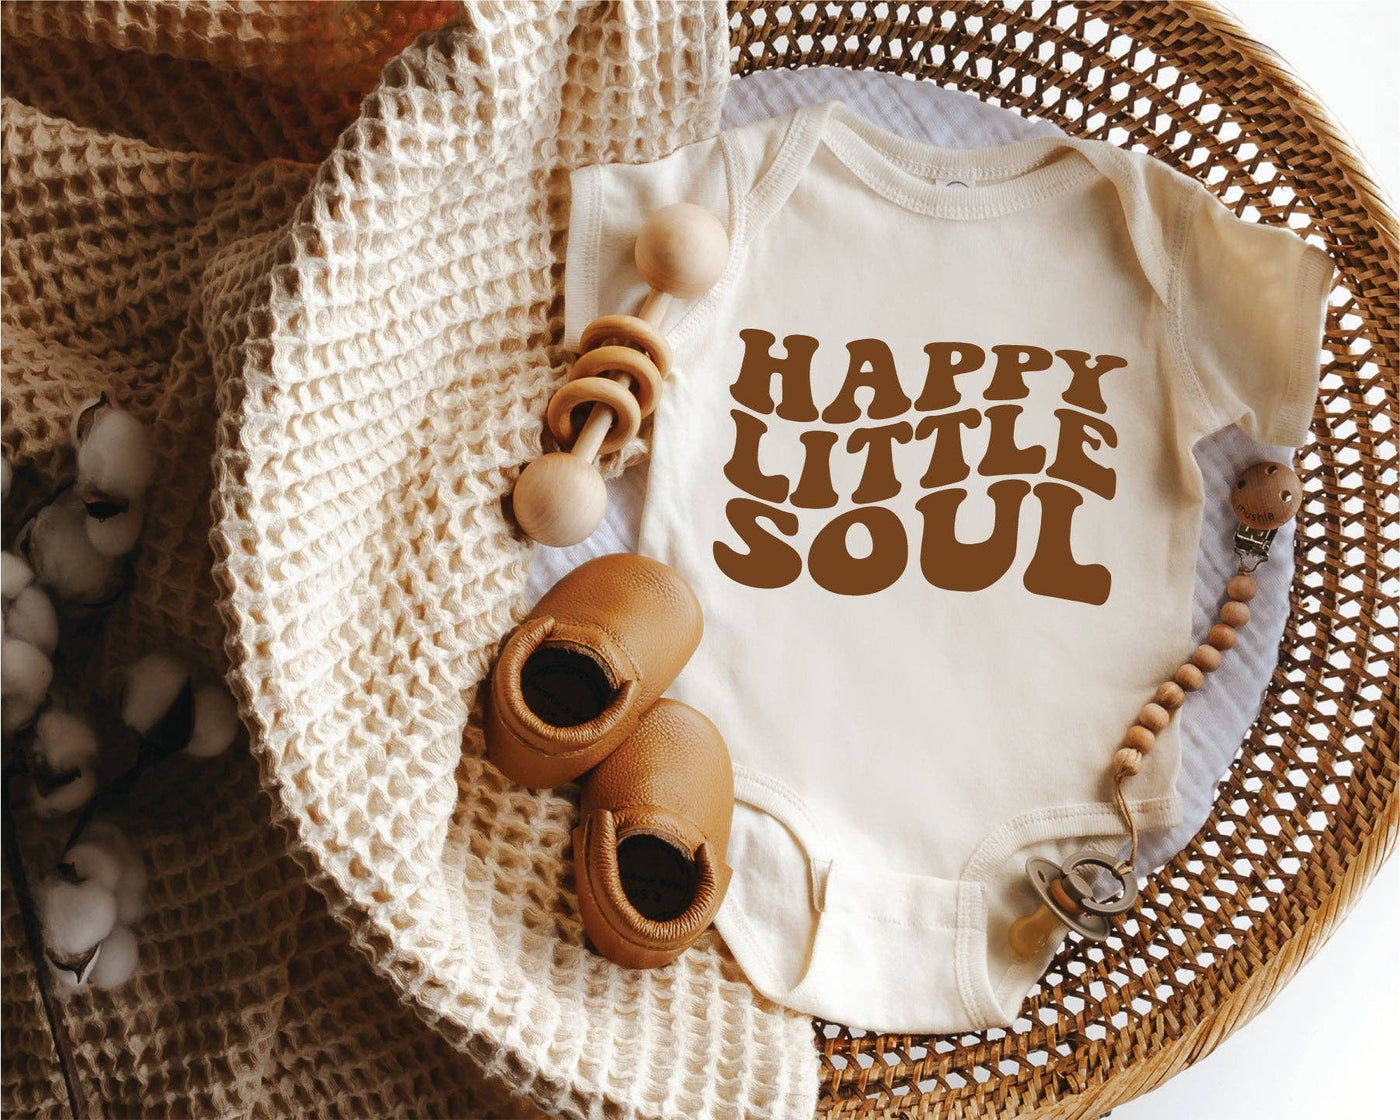 Roots and lace Boho baby bodysuit with happy little soul design - Simple Good